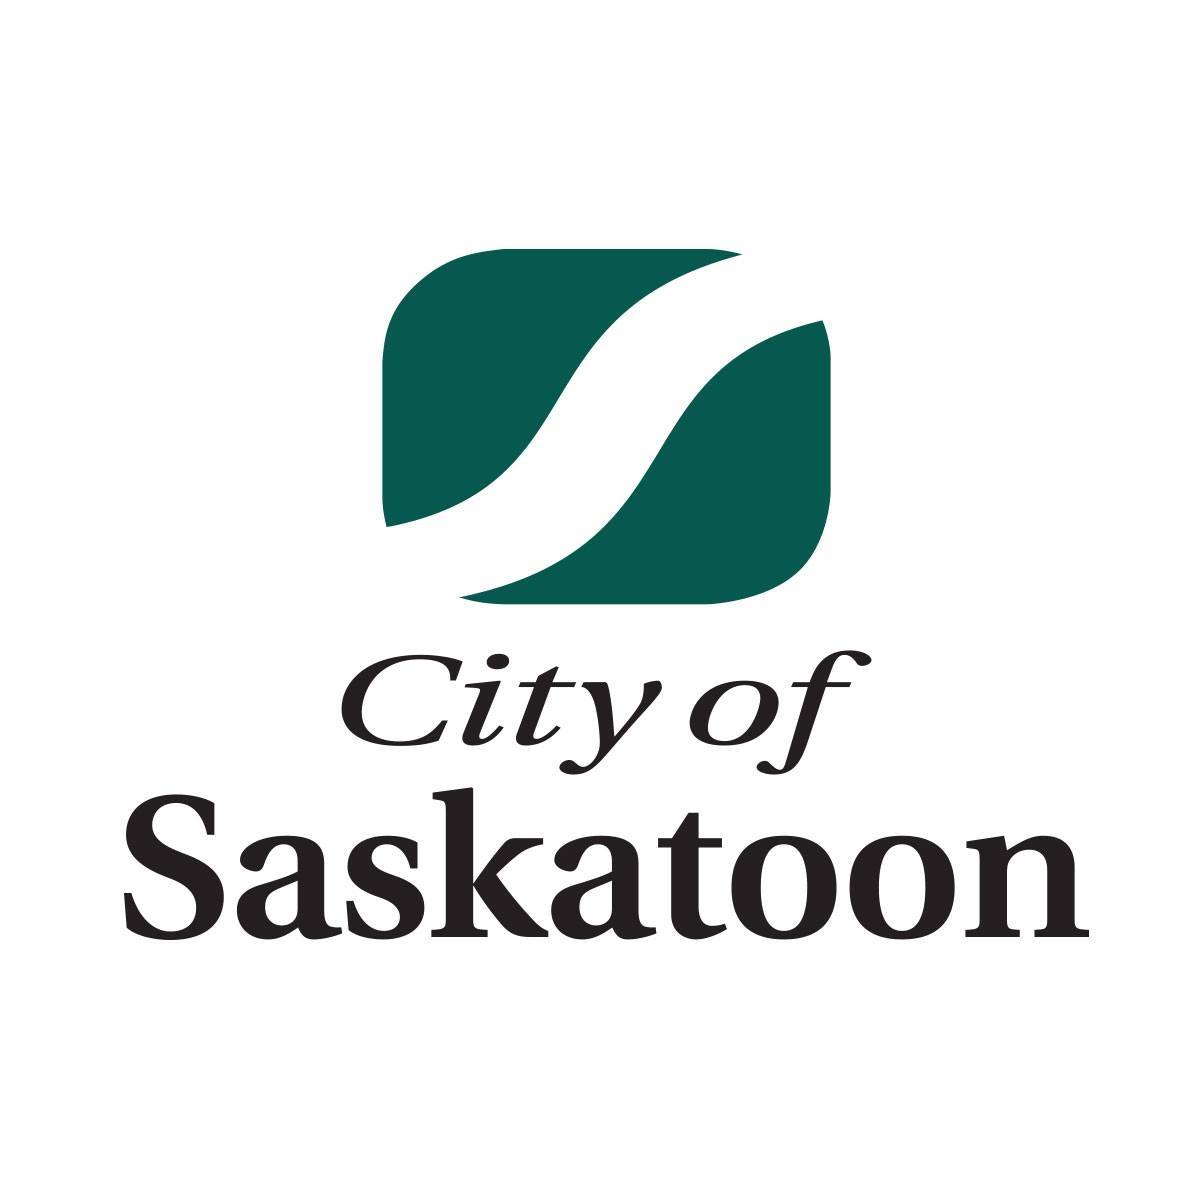 The City of Saskatoon hosted a community round dance on Thursday. The theme of the event was Miyo-Pimatiswin, which means "good life for all" in the Plains Cree language.